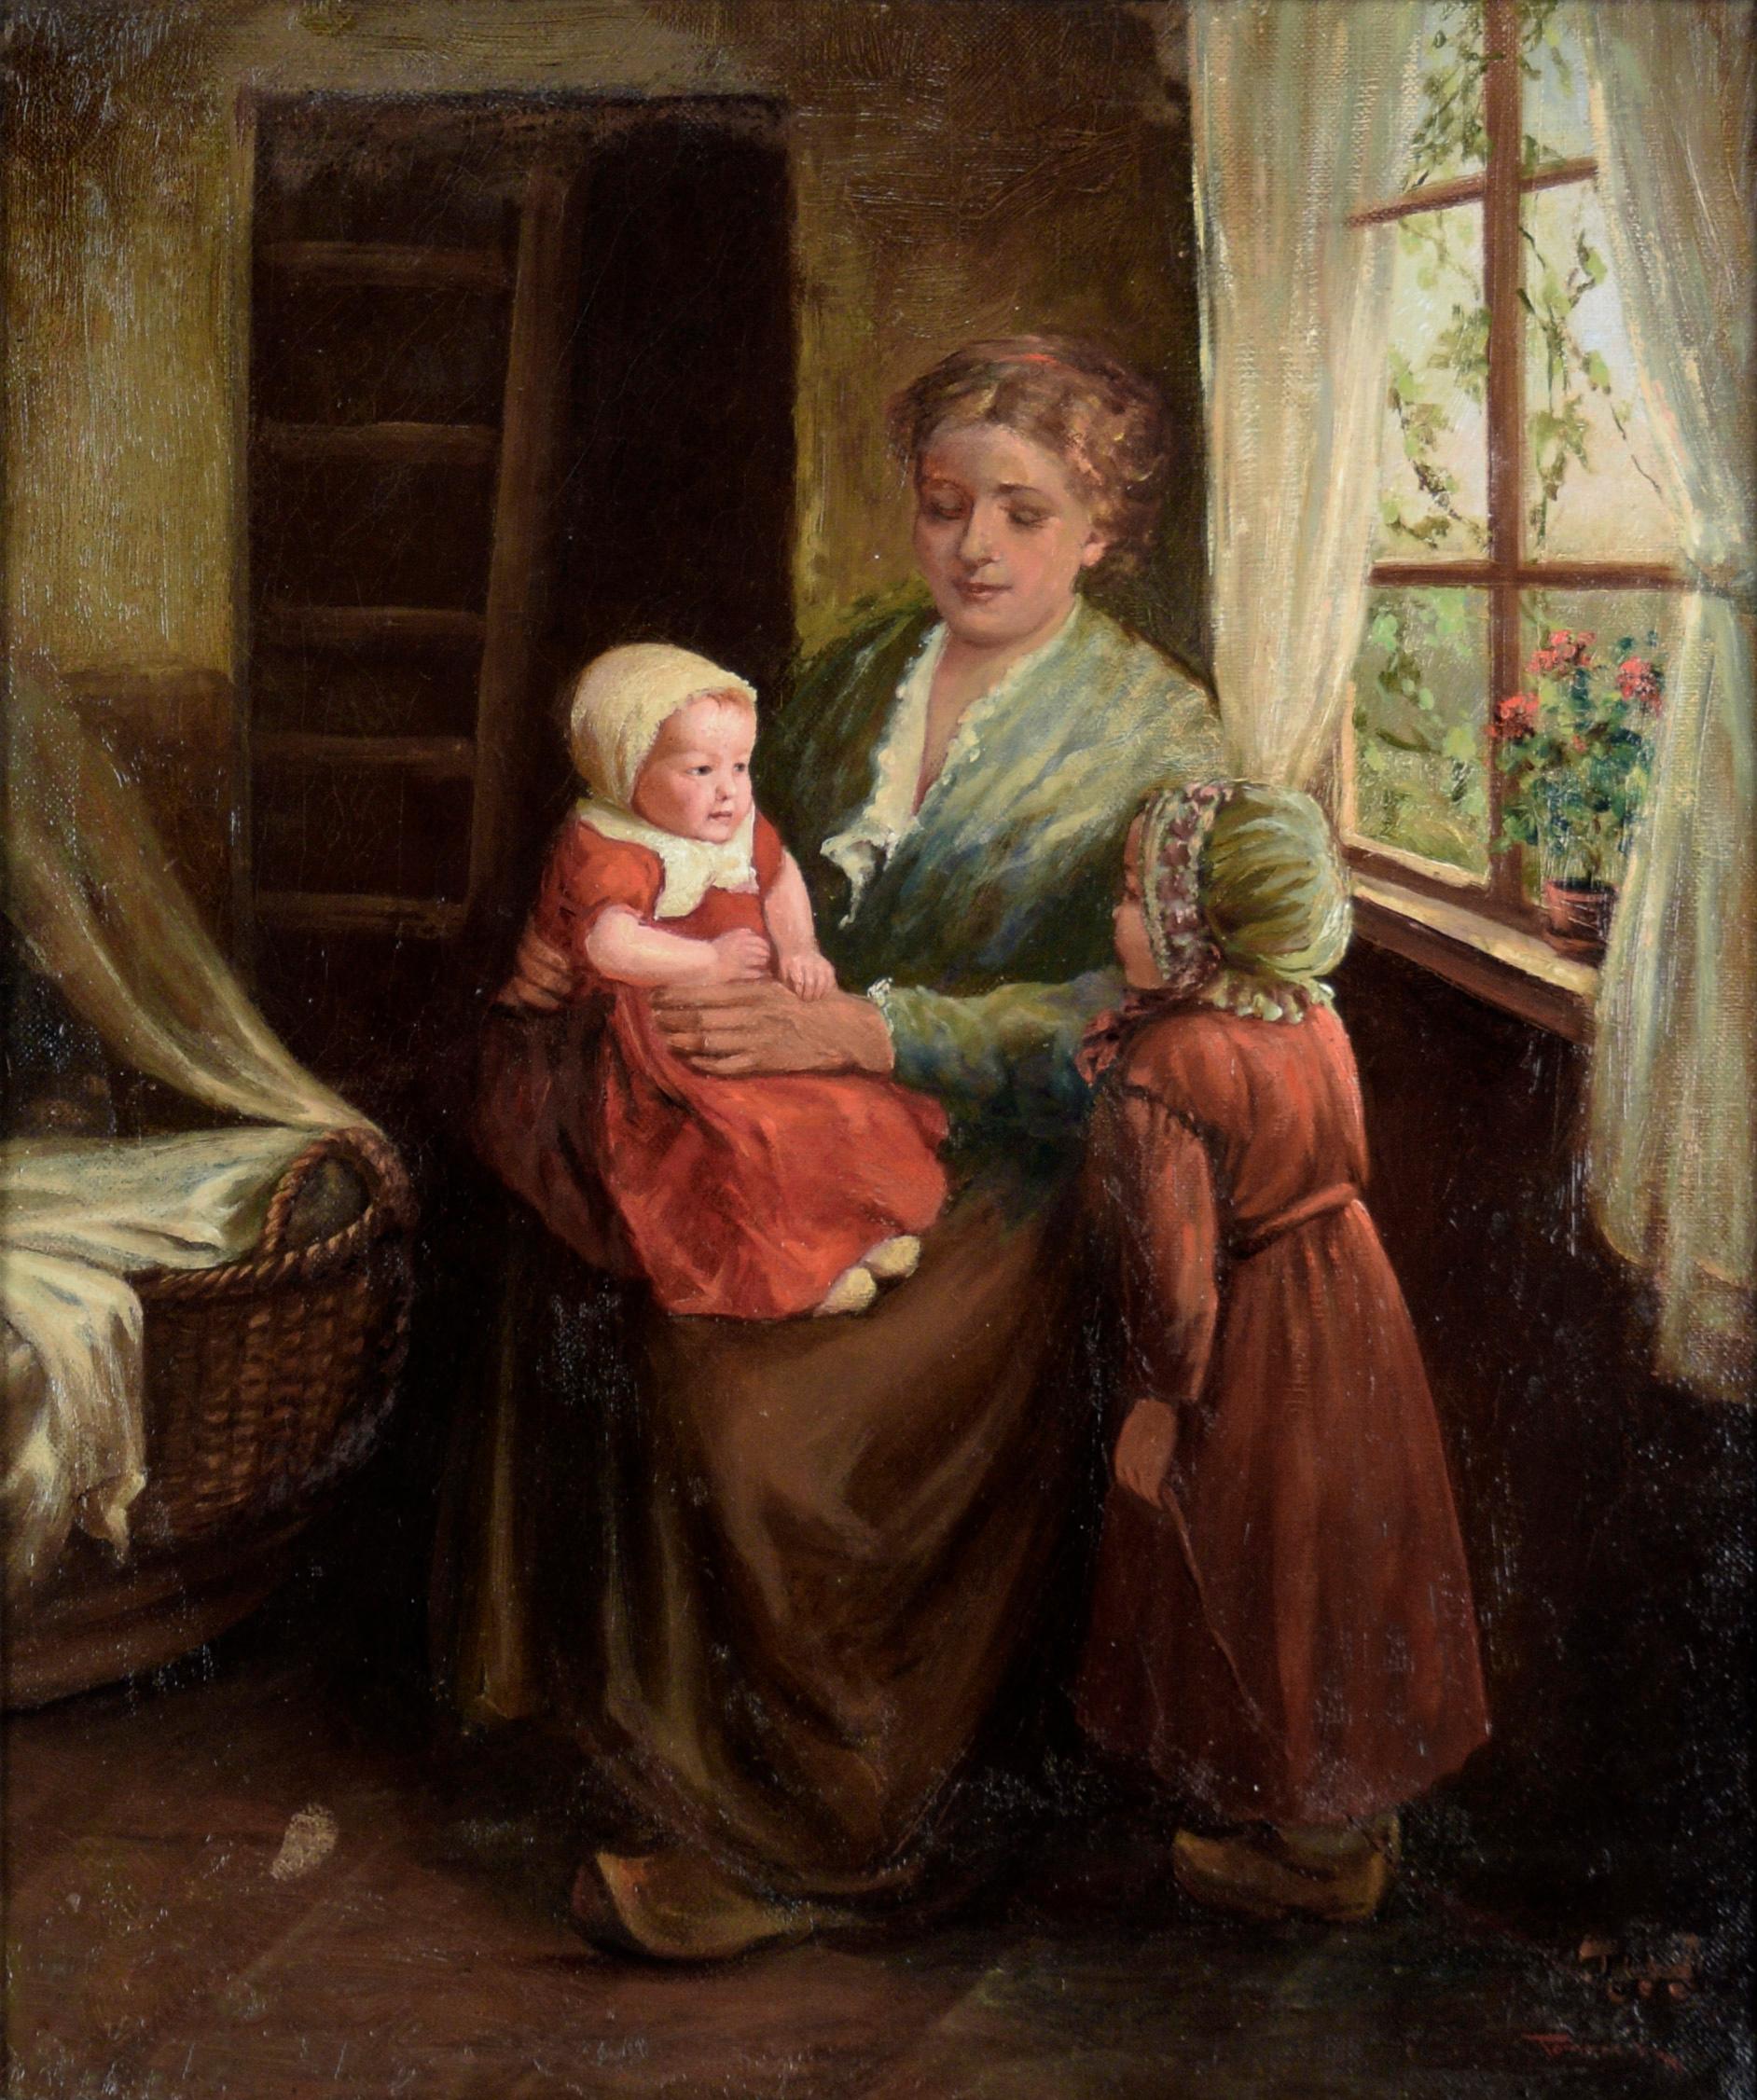 Woman with Two Children in Red - Dutch Style Interior Scene in Oil on Canvas - Painting by Joseph Tomanek